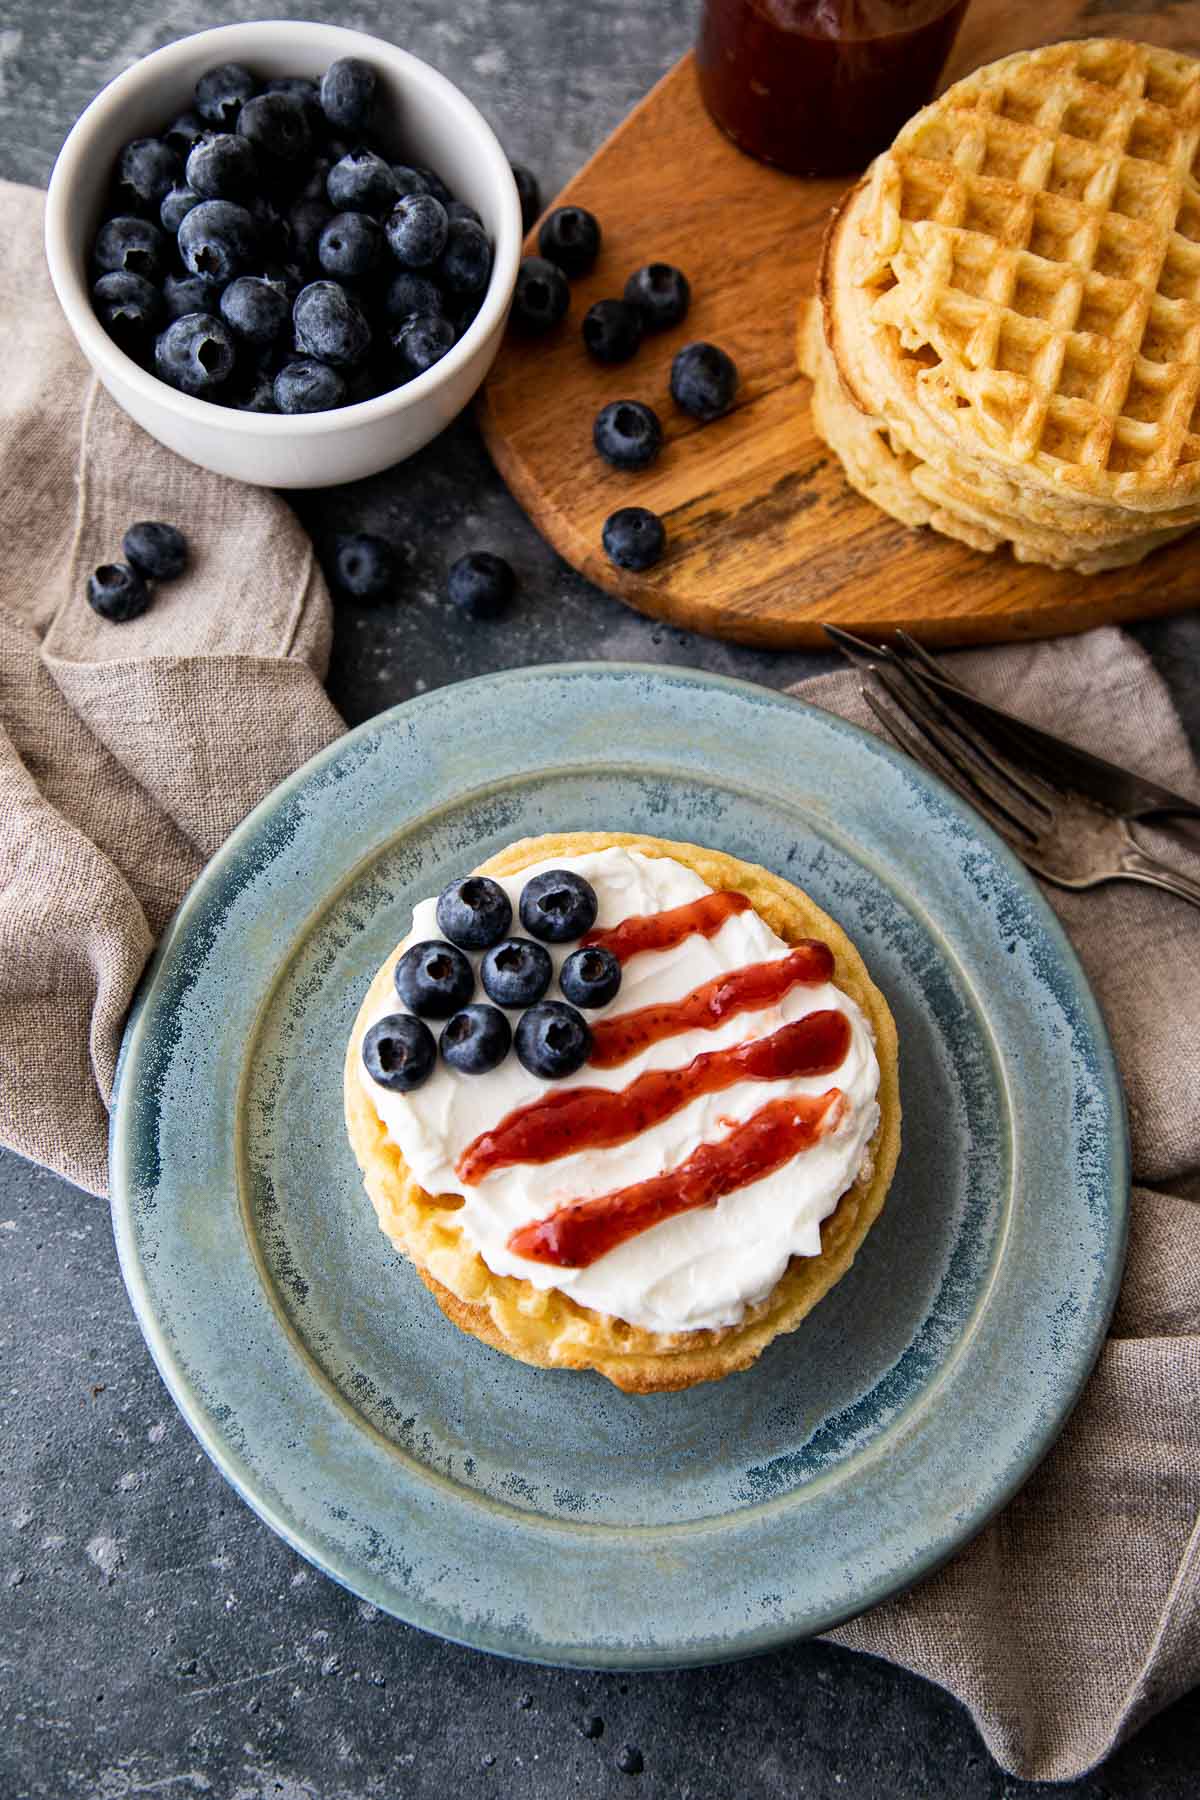 Waffles topped with yogurt, strawberry jam, and blueberries to make flag waffles